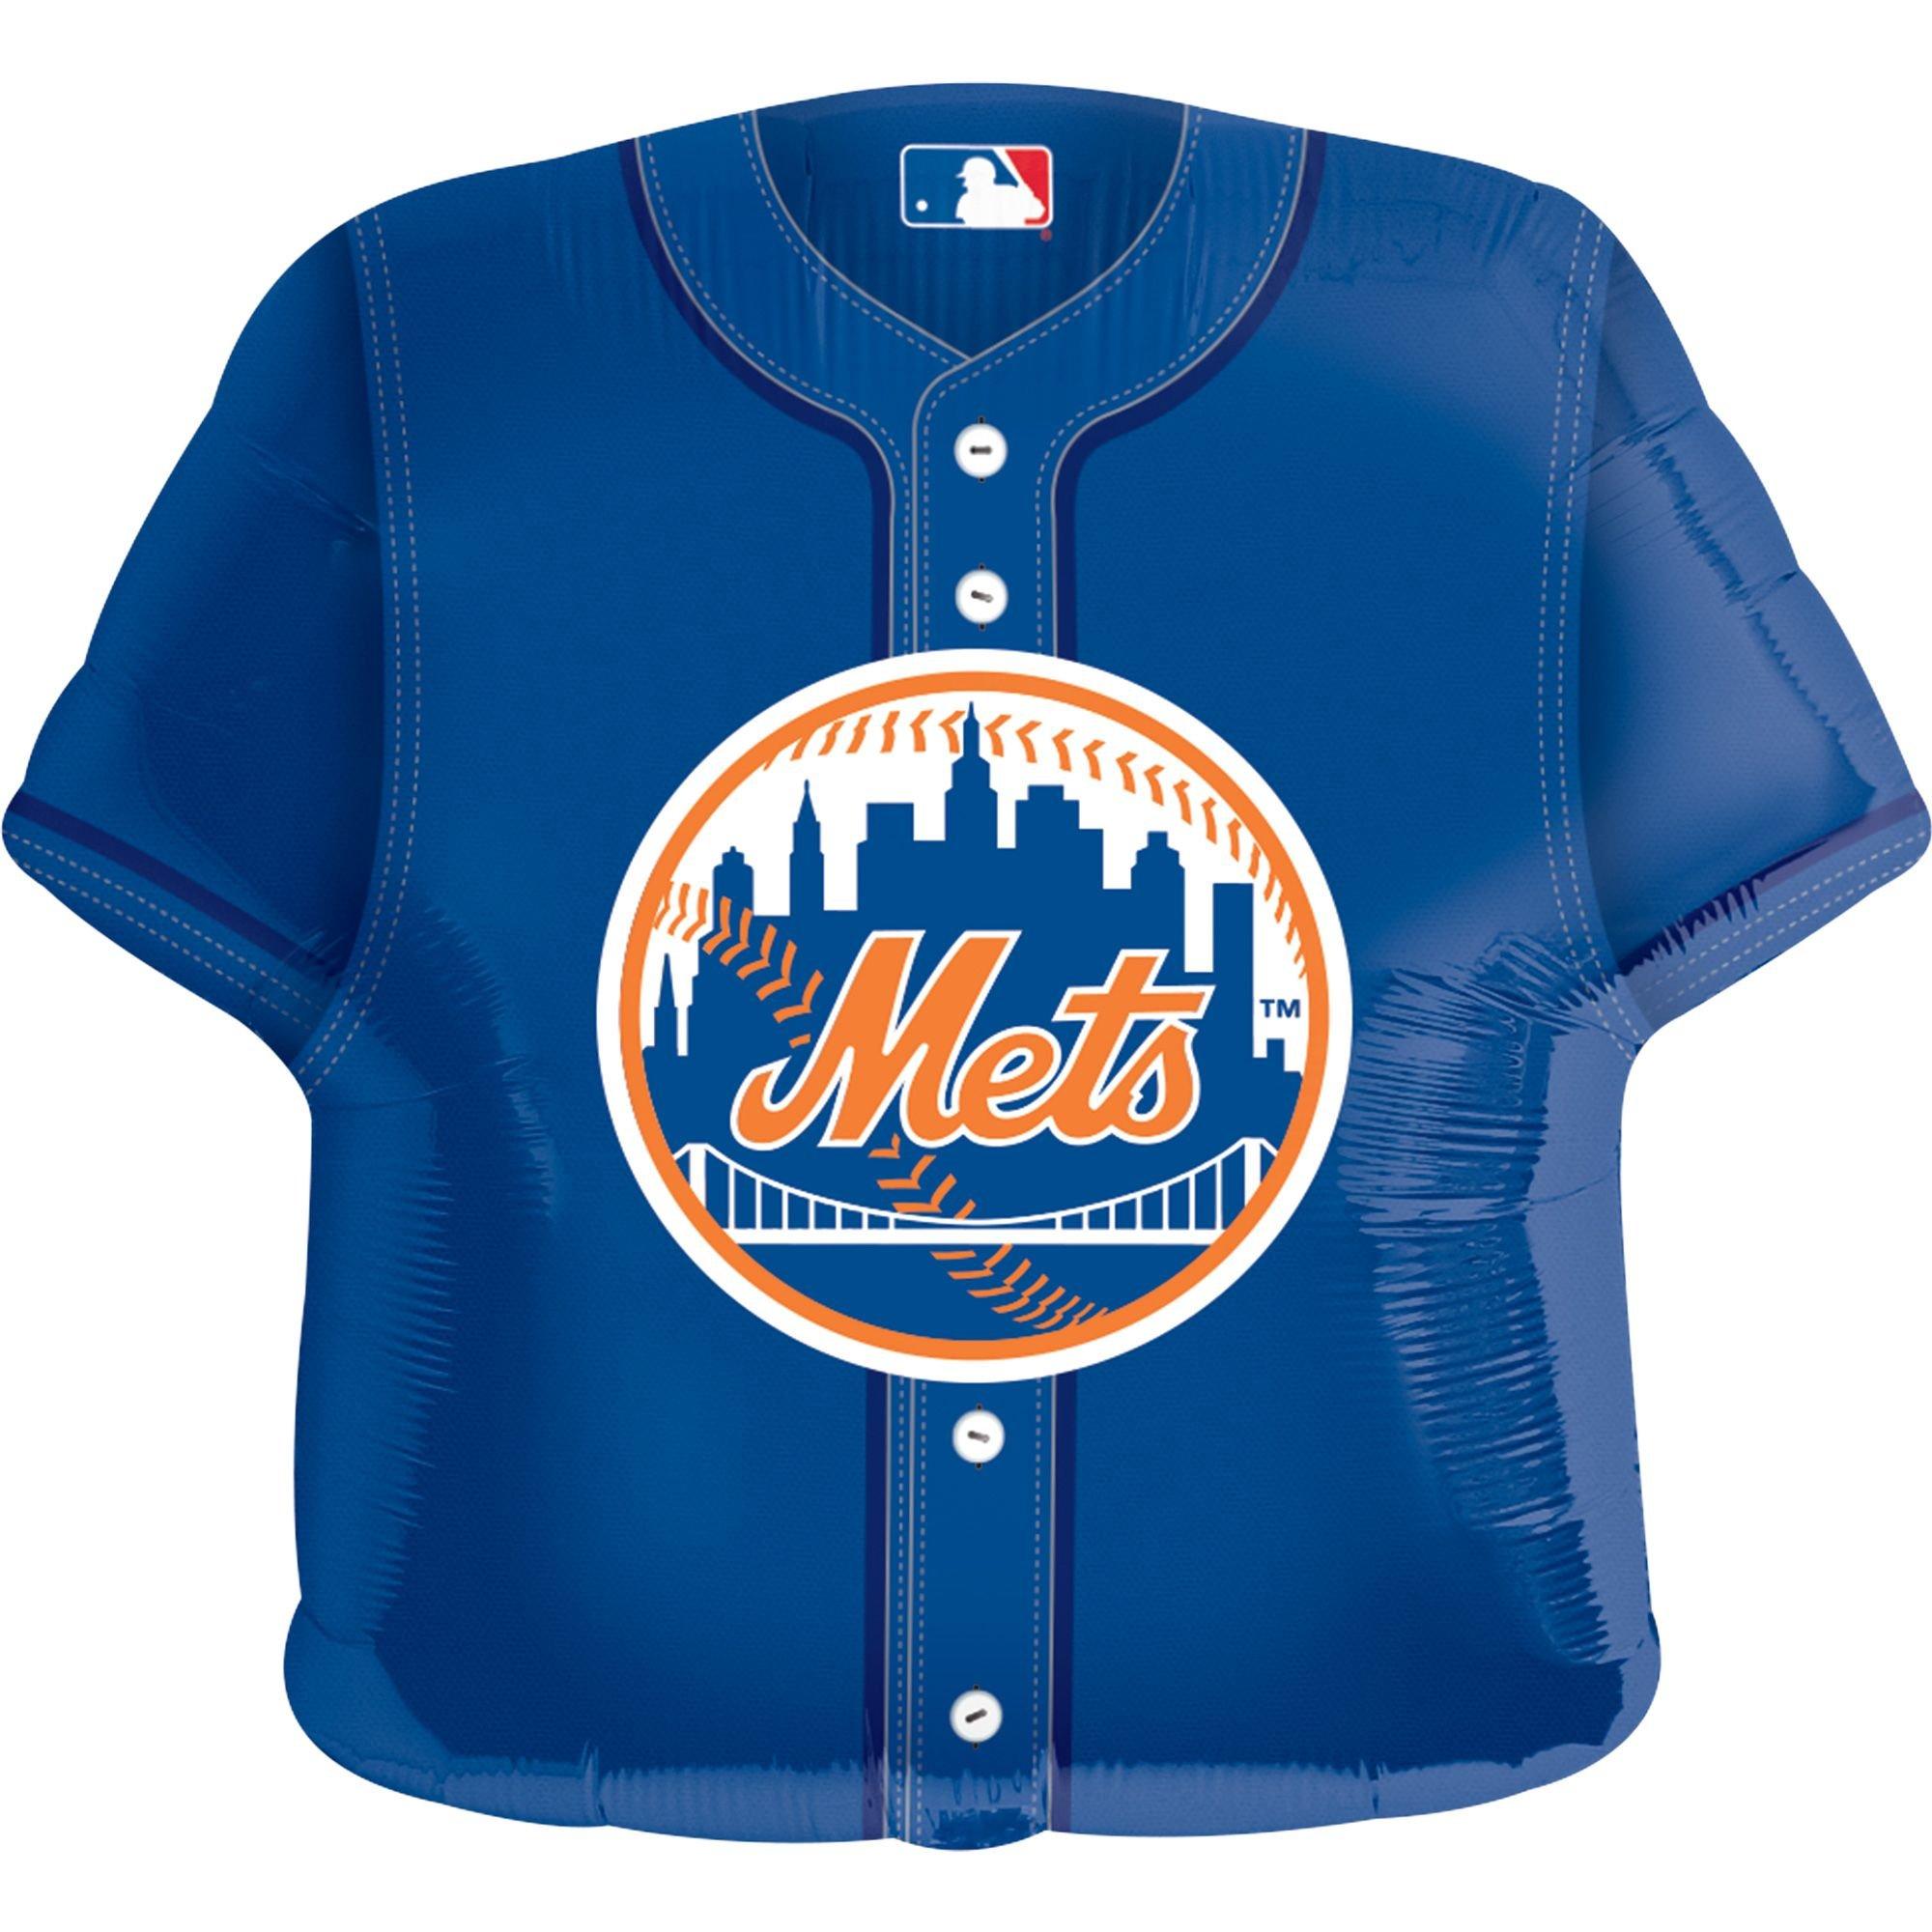 New York Mets Balloon 26in x 25in - Jersey